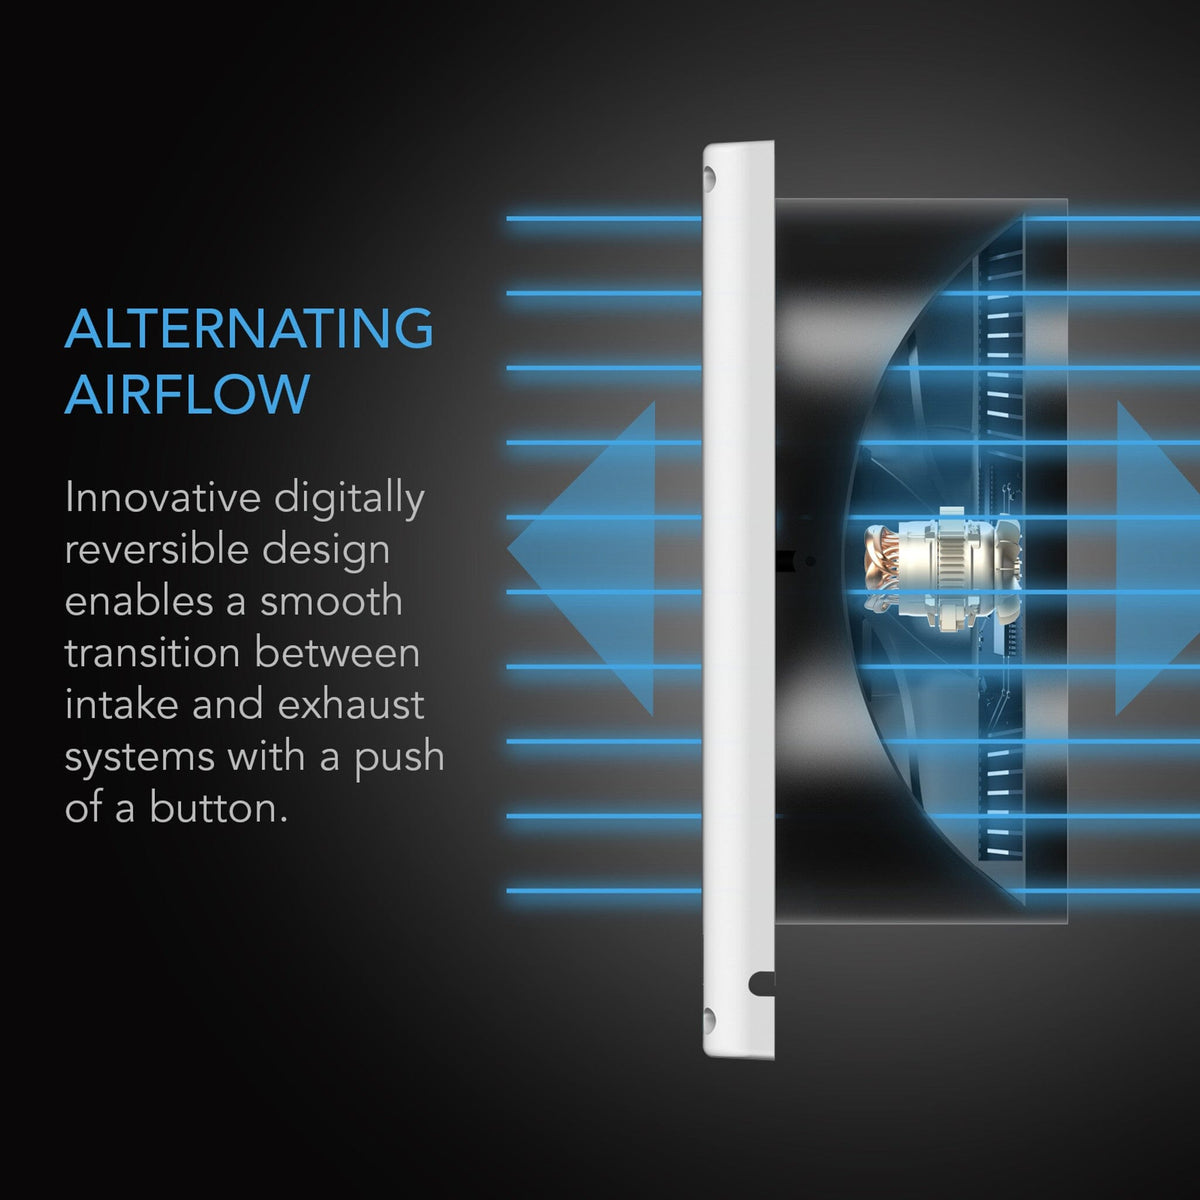 Alternating airflow easily with push of a button